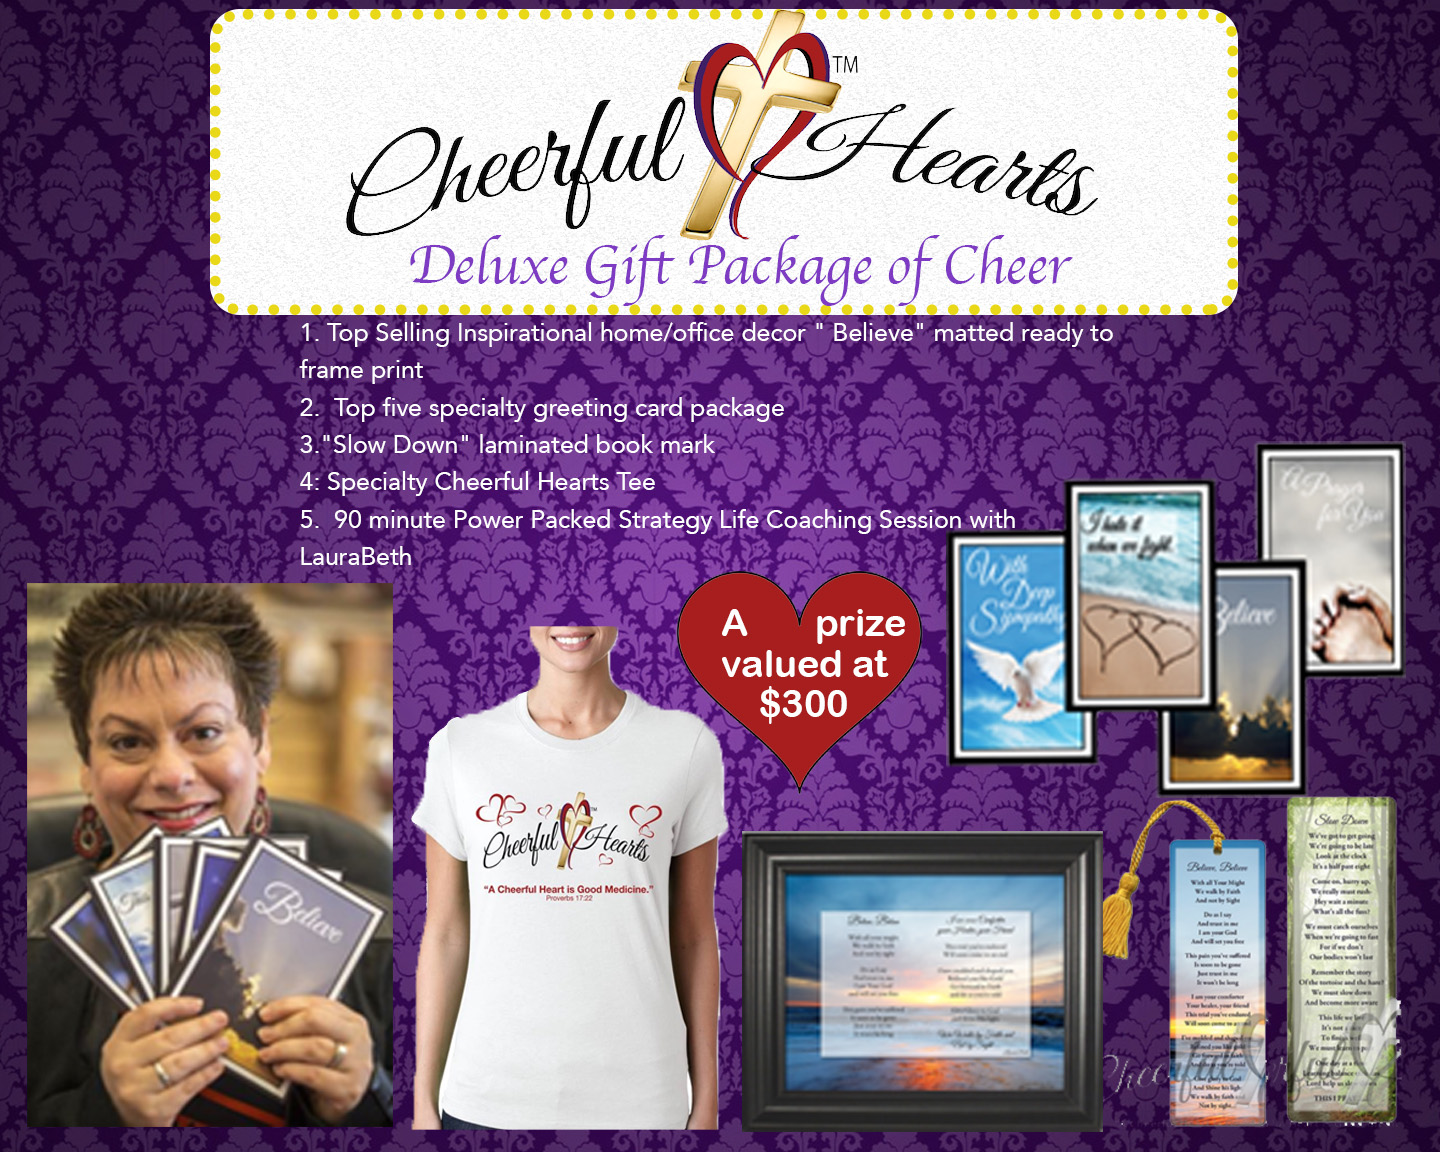 Win a Deluxe Gift Package of Cheer – a $300 Value!!